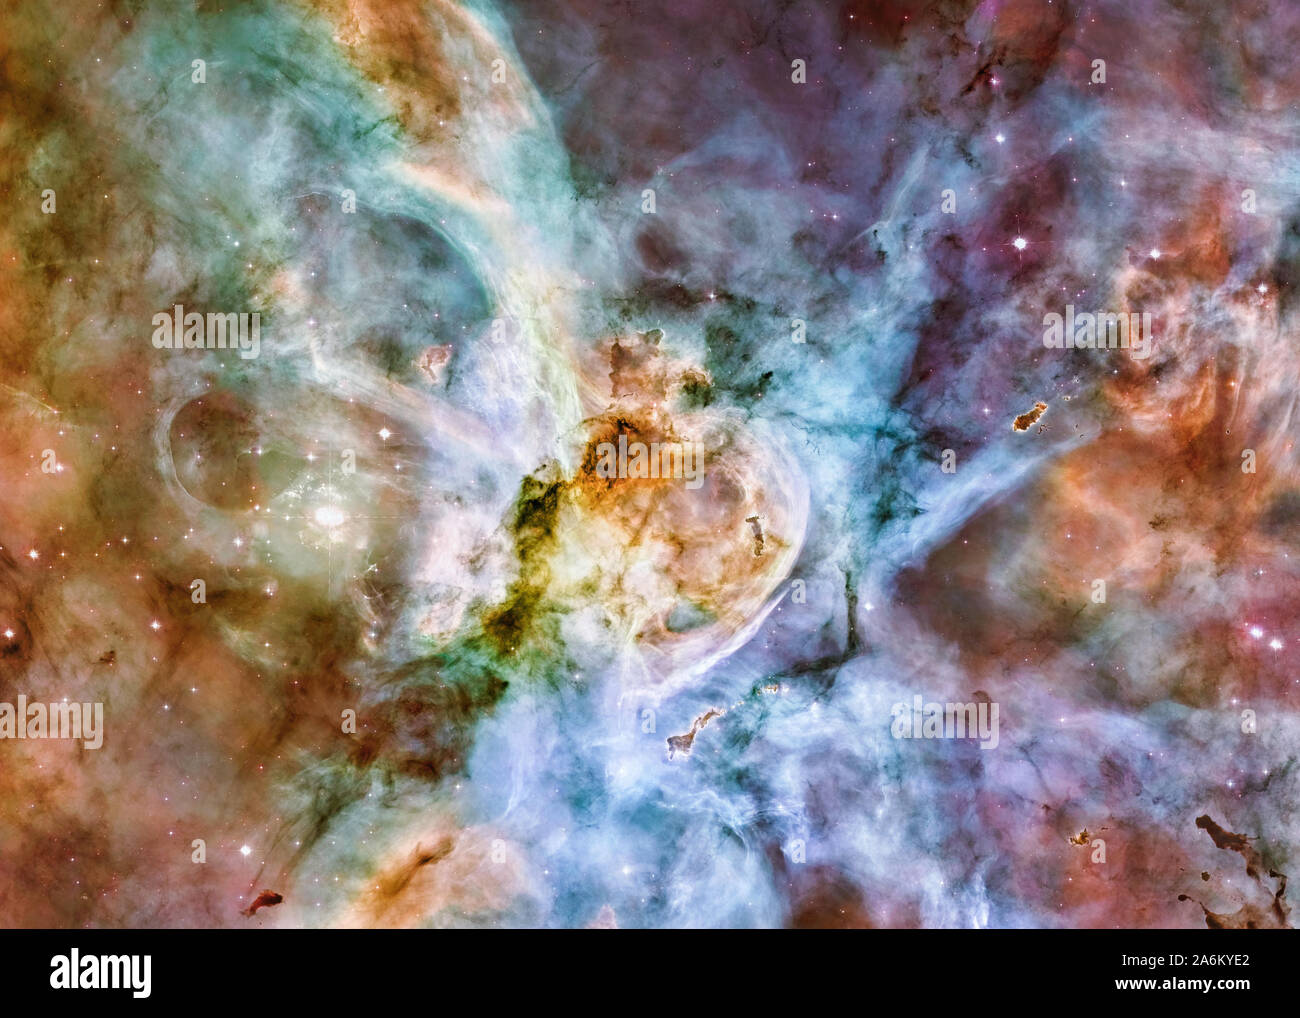 Download Carina Nebula wallpapers for mobile phone free Carina Nebula  HD pictures